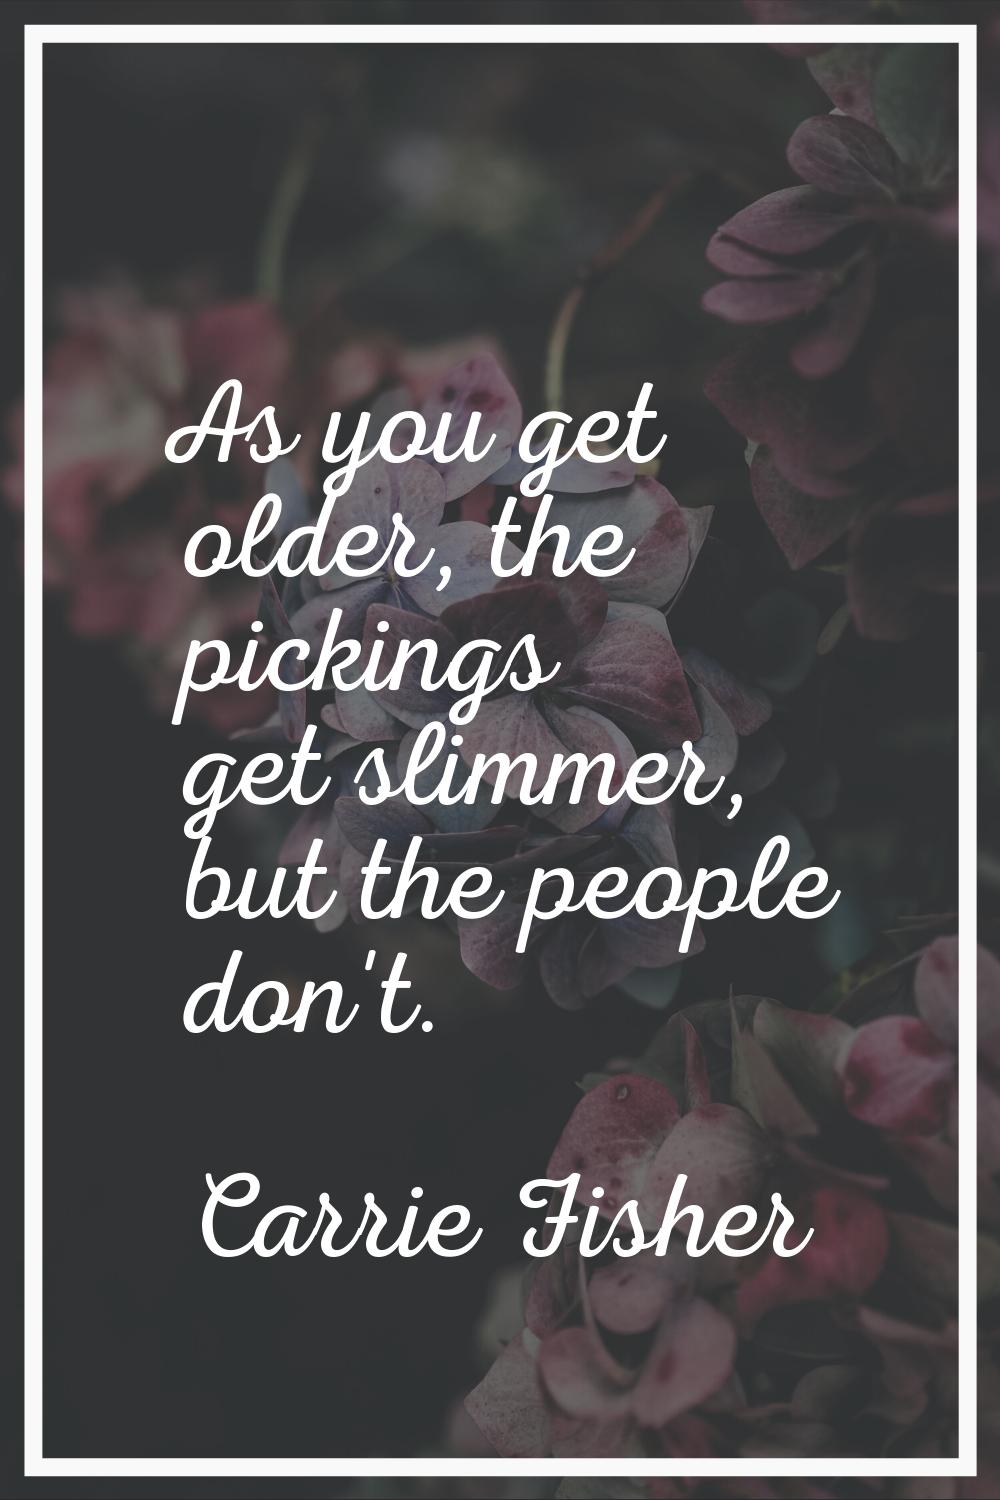 As you get older, the pickings get slimmer, but the people don't.